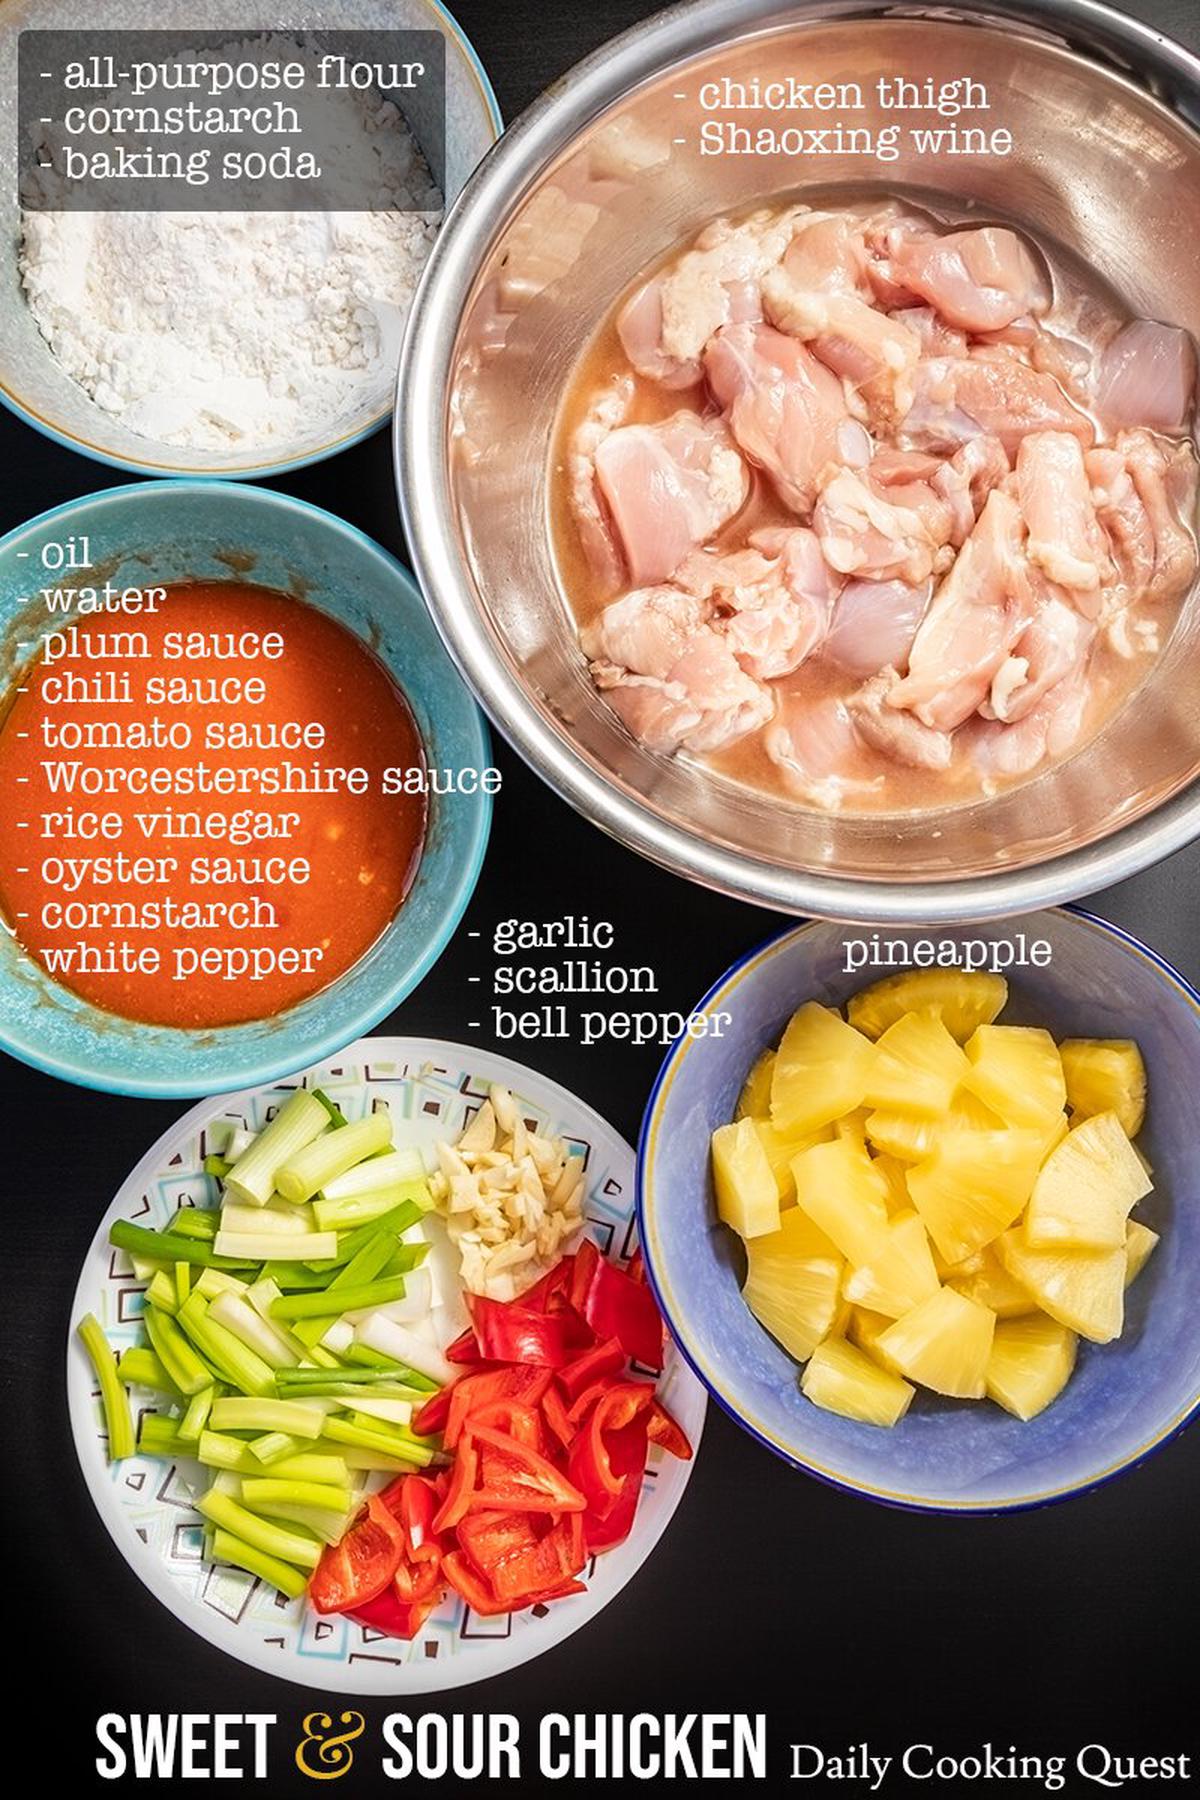 Ingredients to prepare sweet and sour chicken.